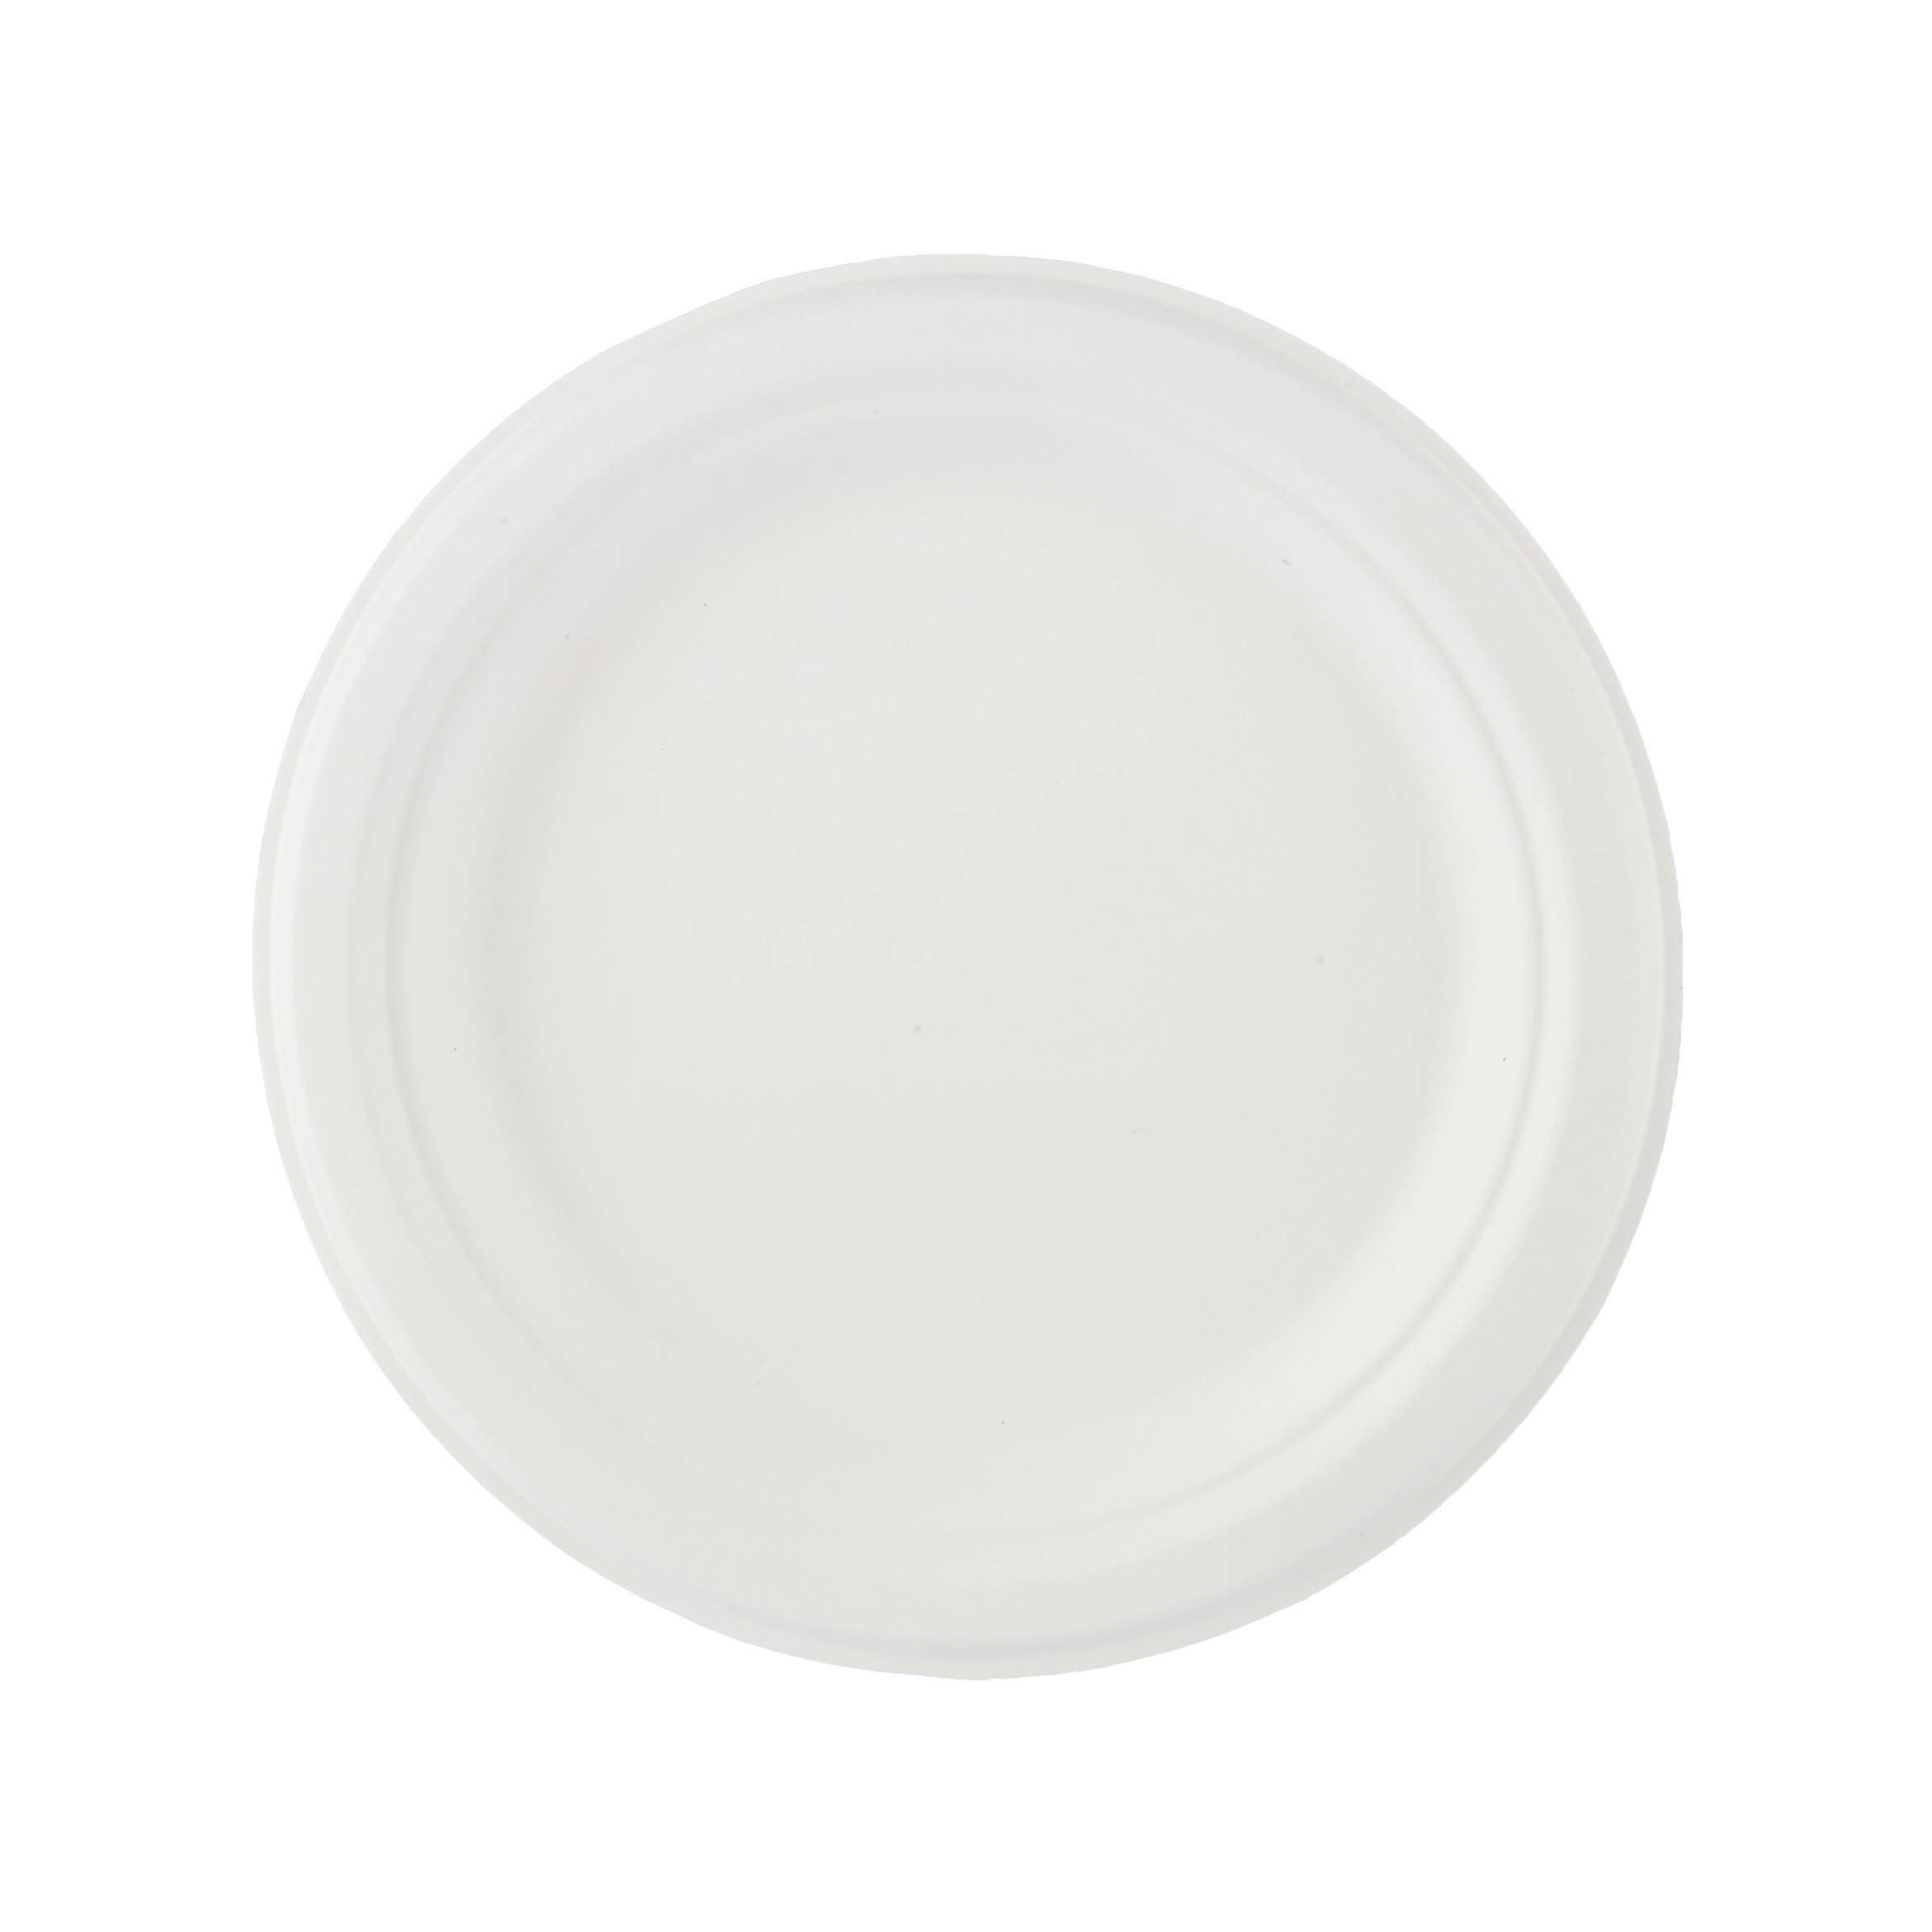 Bio-Degradable Plate 7 Inch 1000 Pieces - Hotpack Global